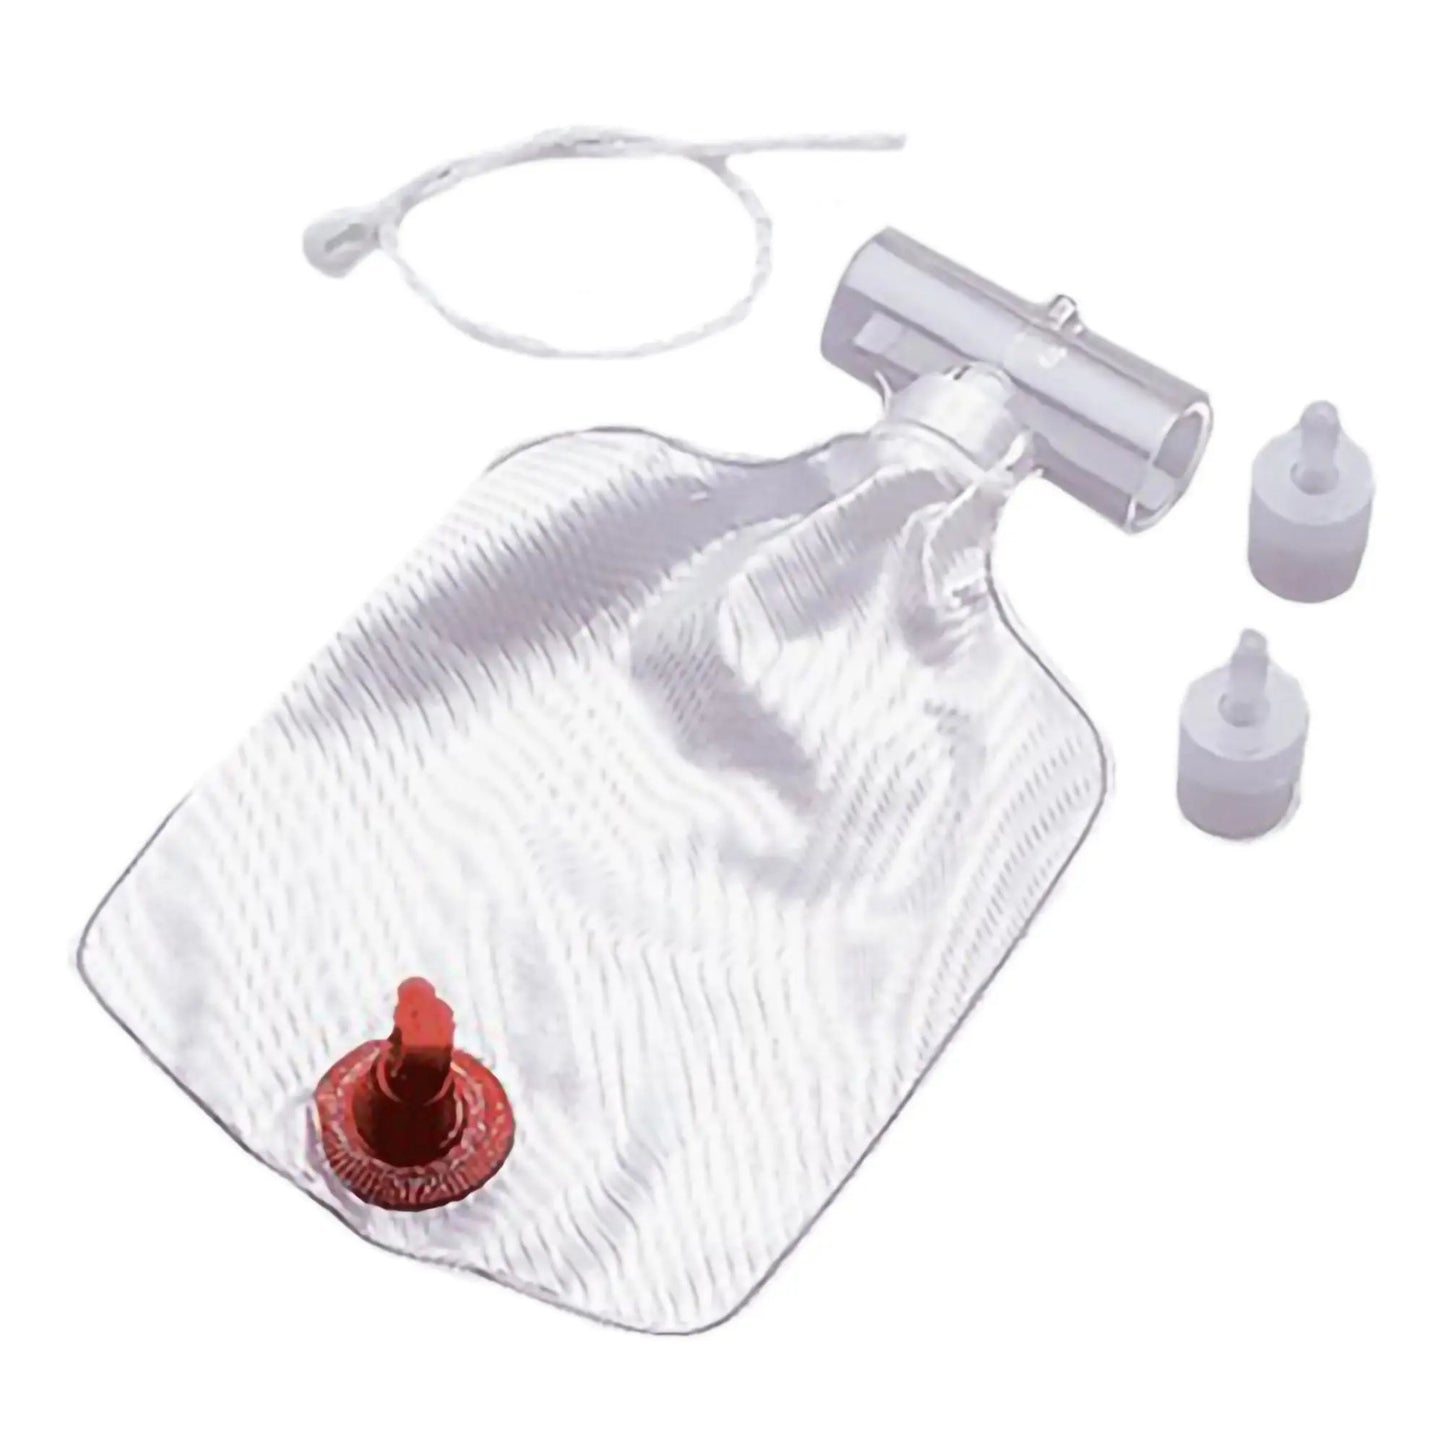 Vyaire Medical AirLife Trach Tee Drain with Bag